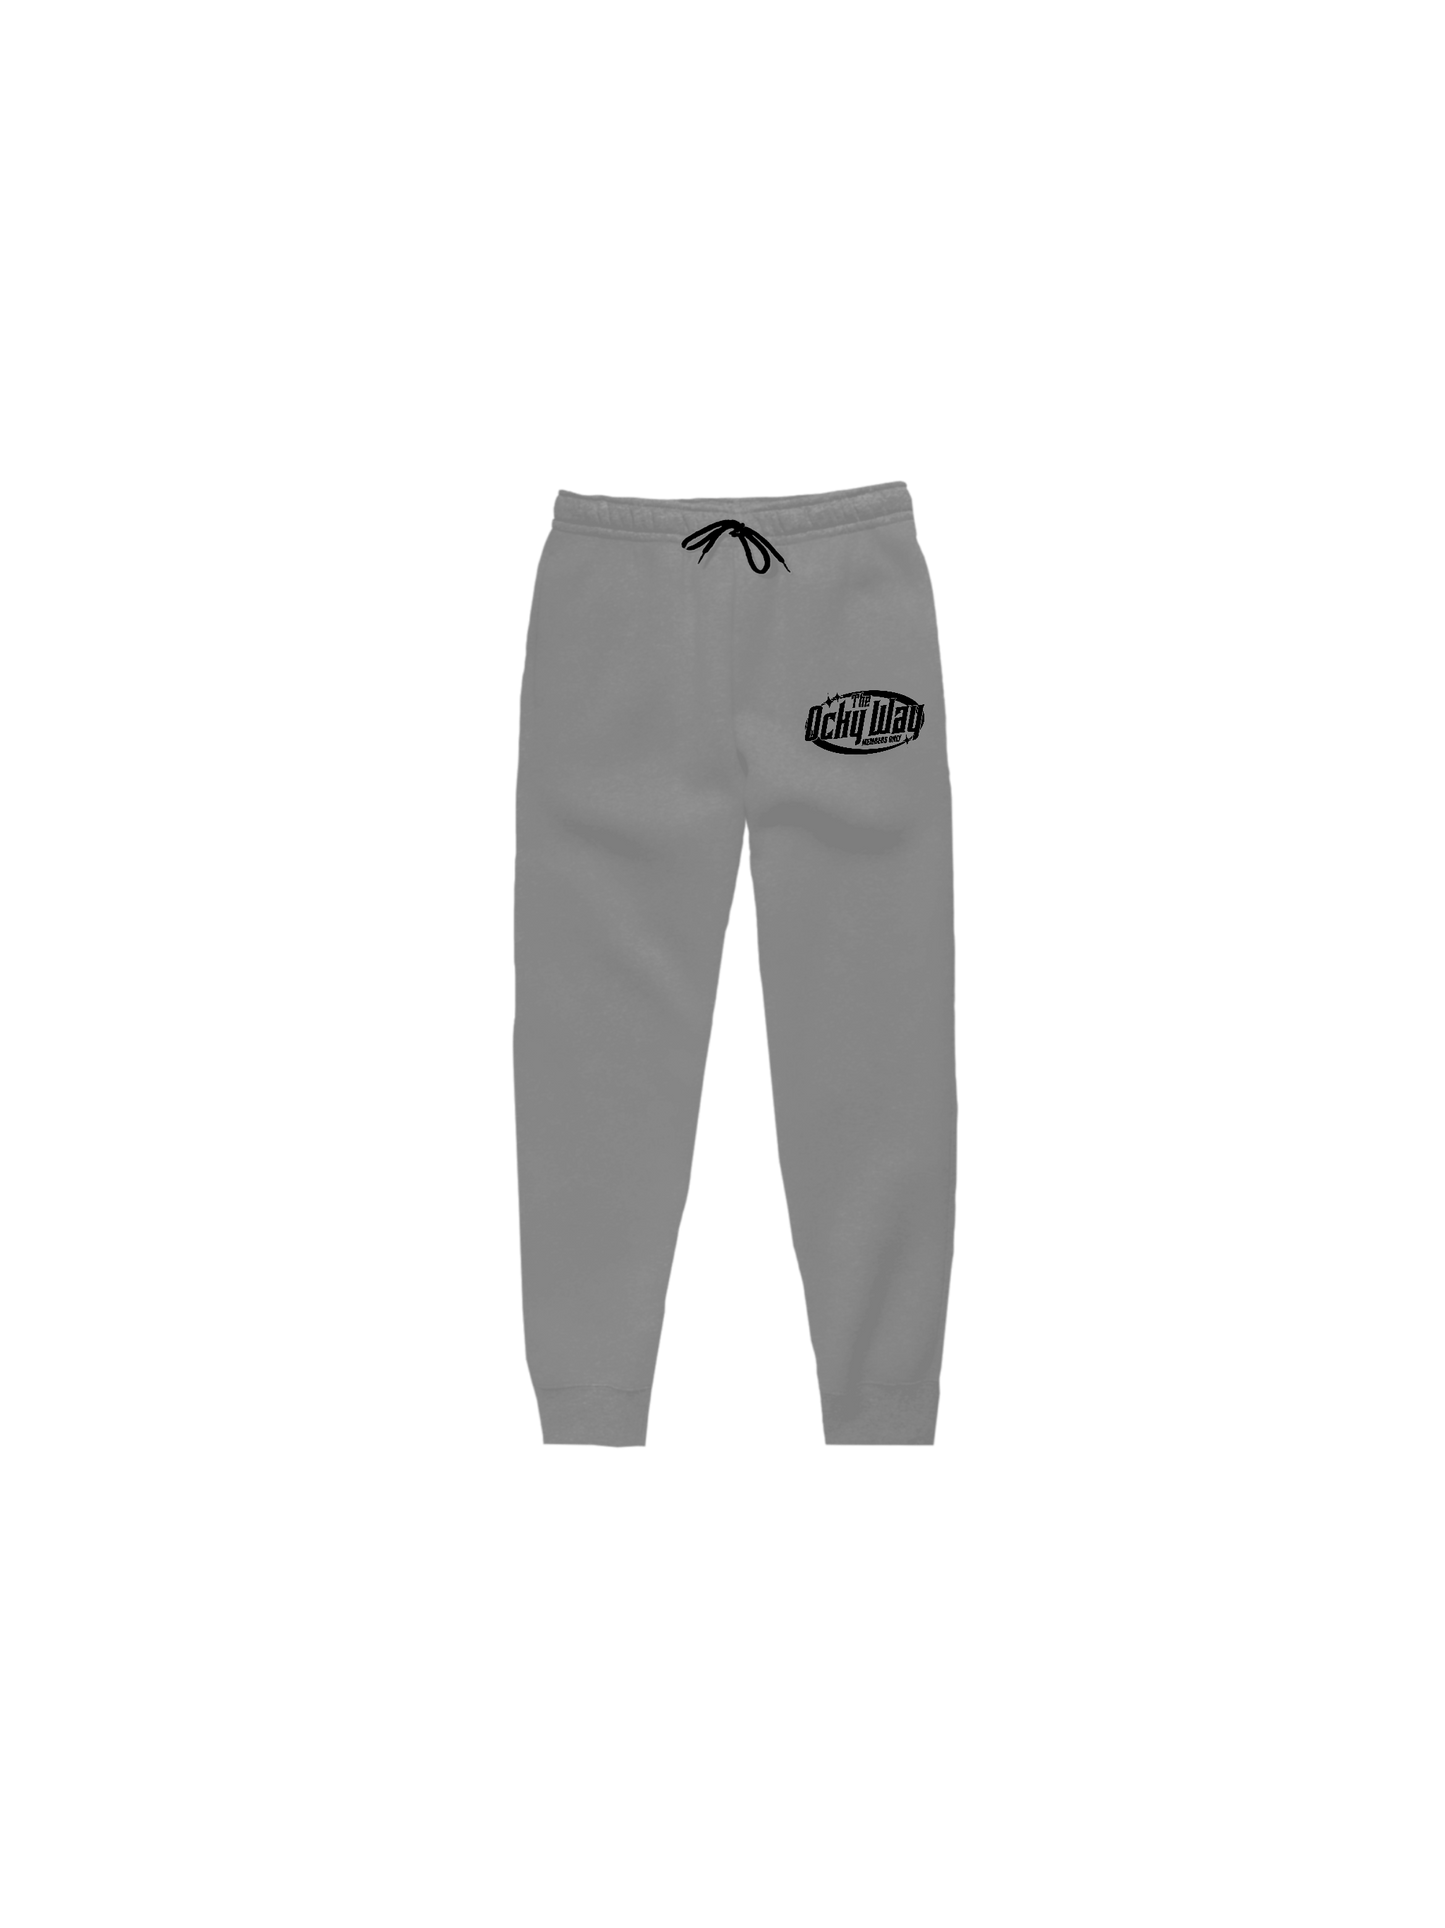 OCKY WAY JOGGERS - MEMBERS ONLY